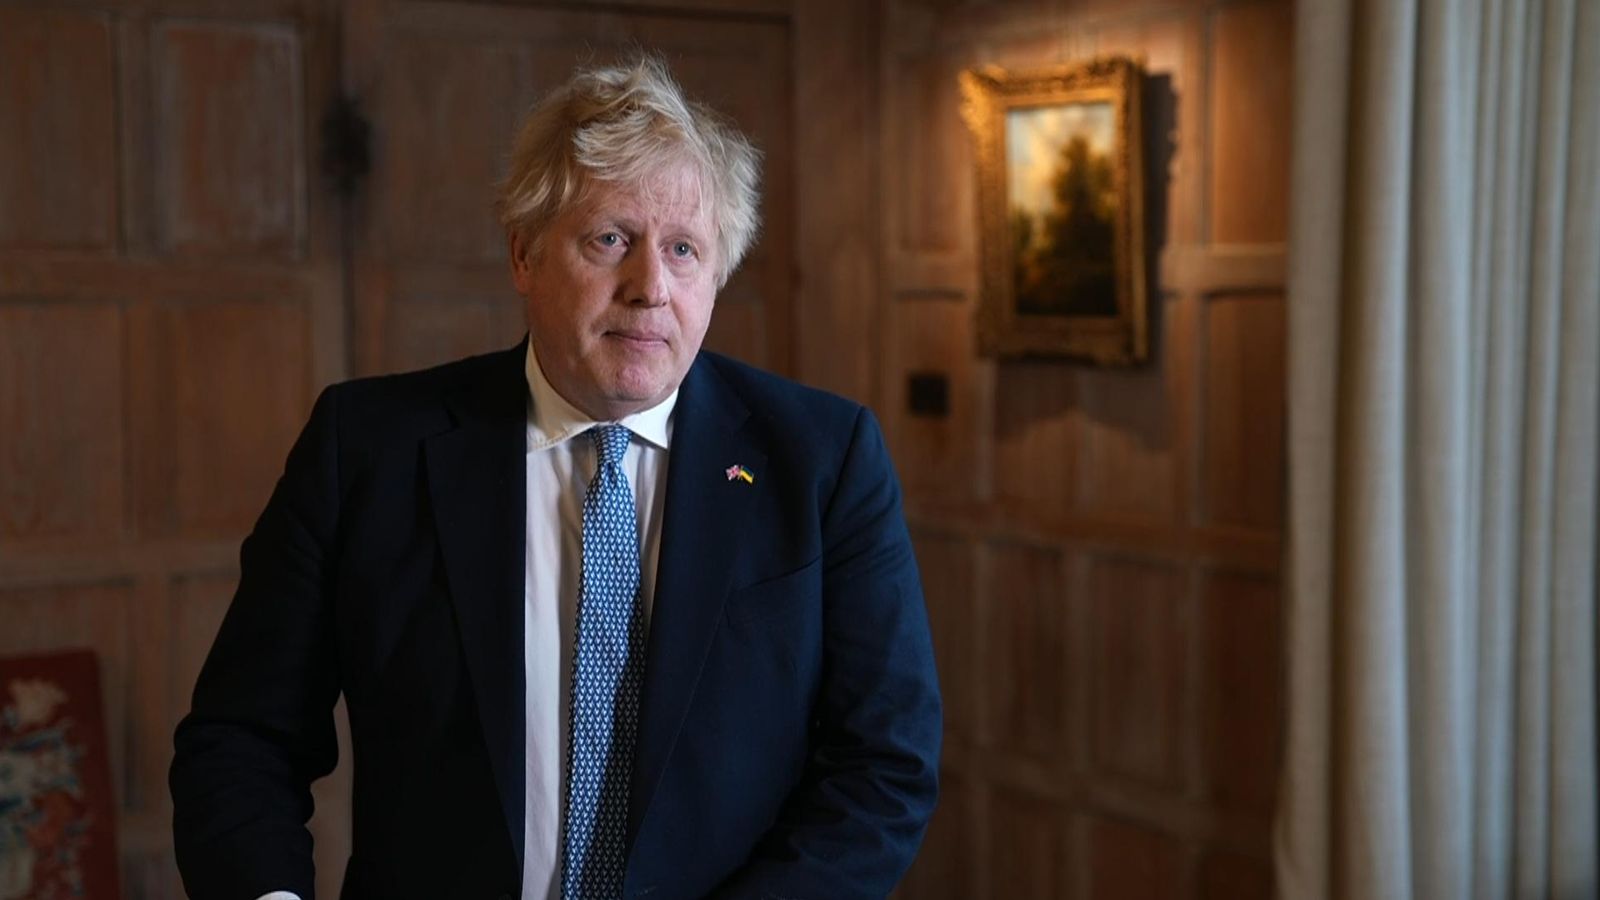 boris-johnson-fined-prime-minister-apologises-after-receiving-fixed-penalty-notice-for-lockdown-breaking-party